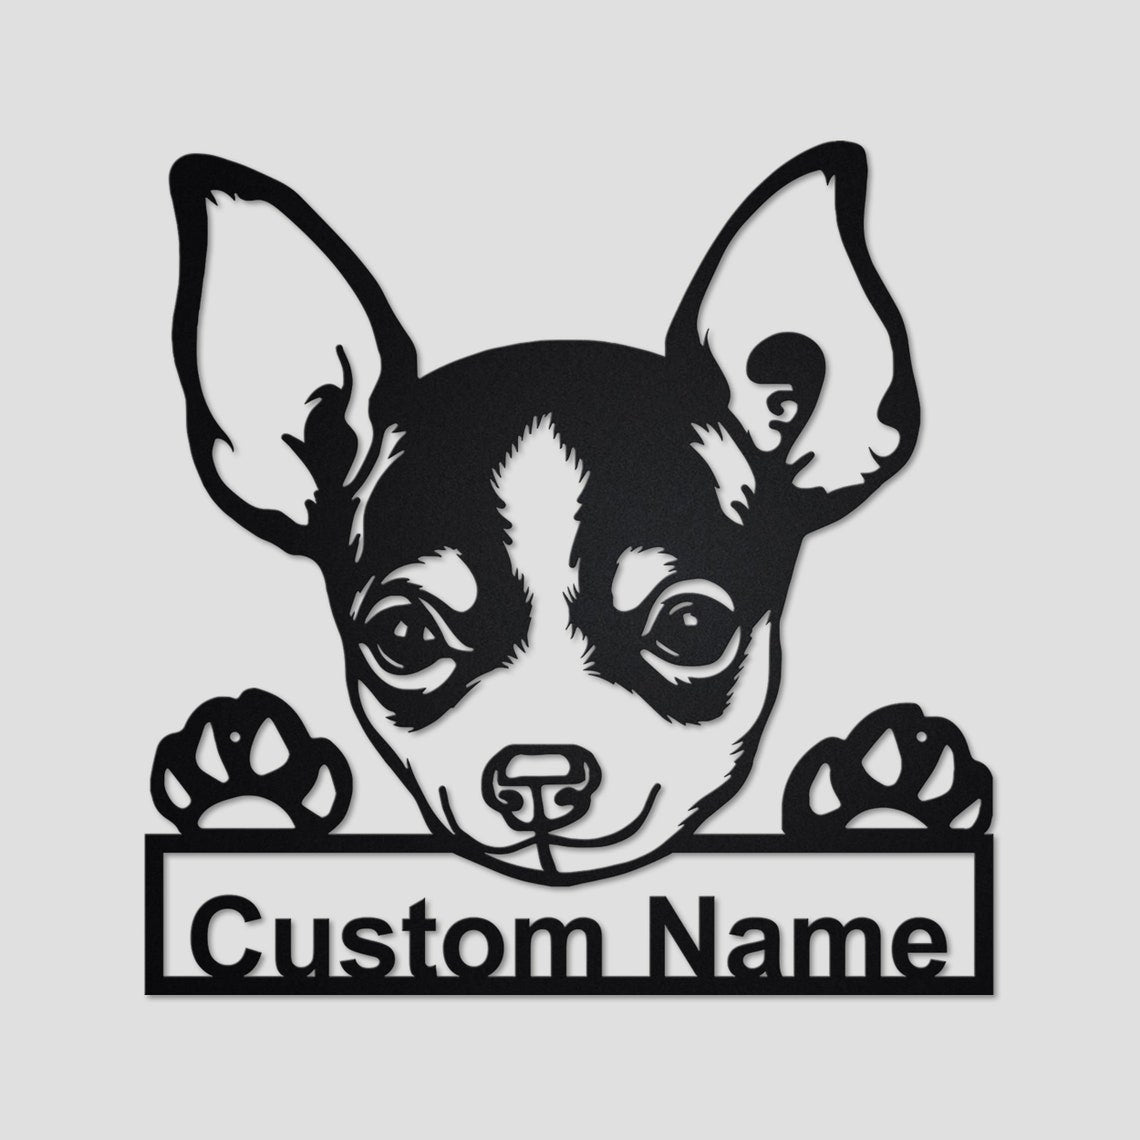 Personalized Custom Chihuahua Dog Metal Sign